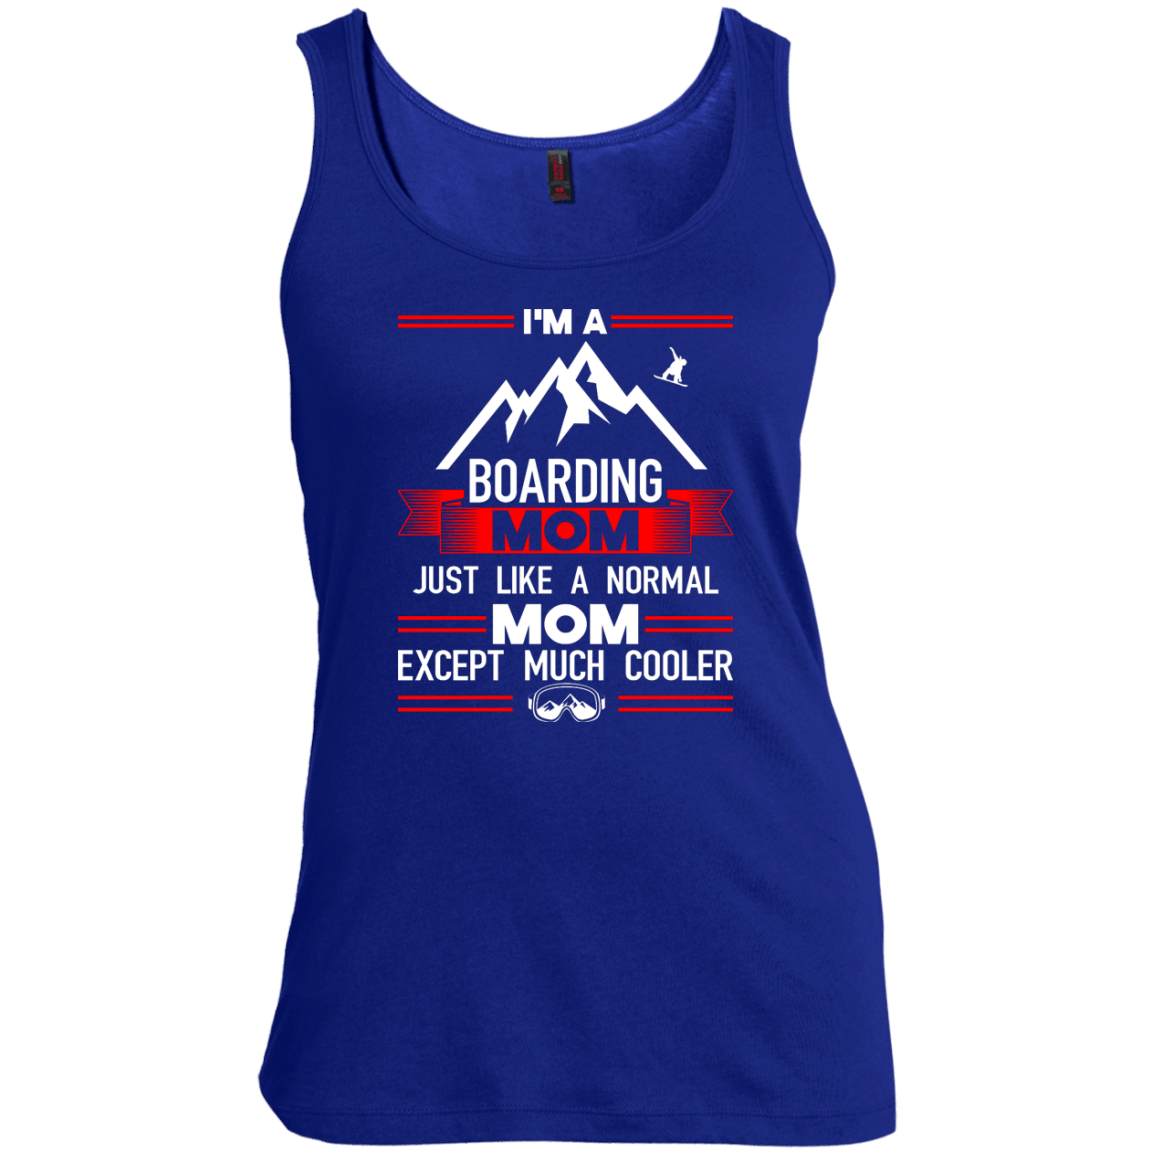 I'm A Boarding Mom Just Like A Normal Mom Except Much Cooler Tank Tops - Powderaddicts